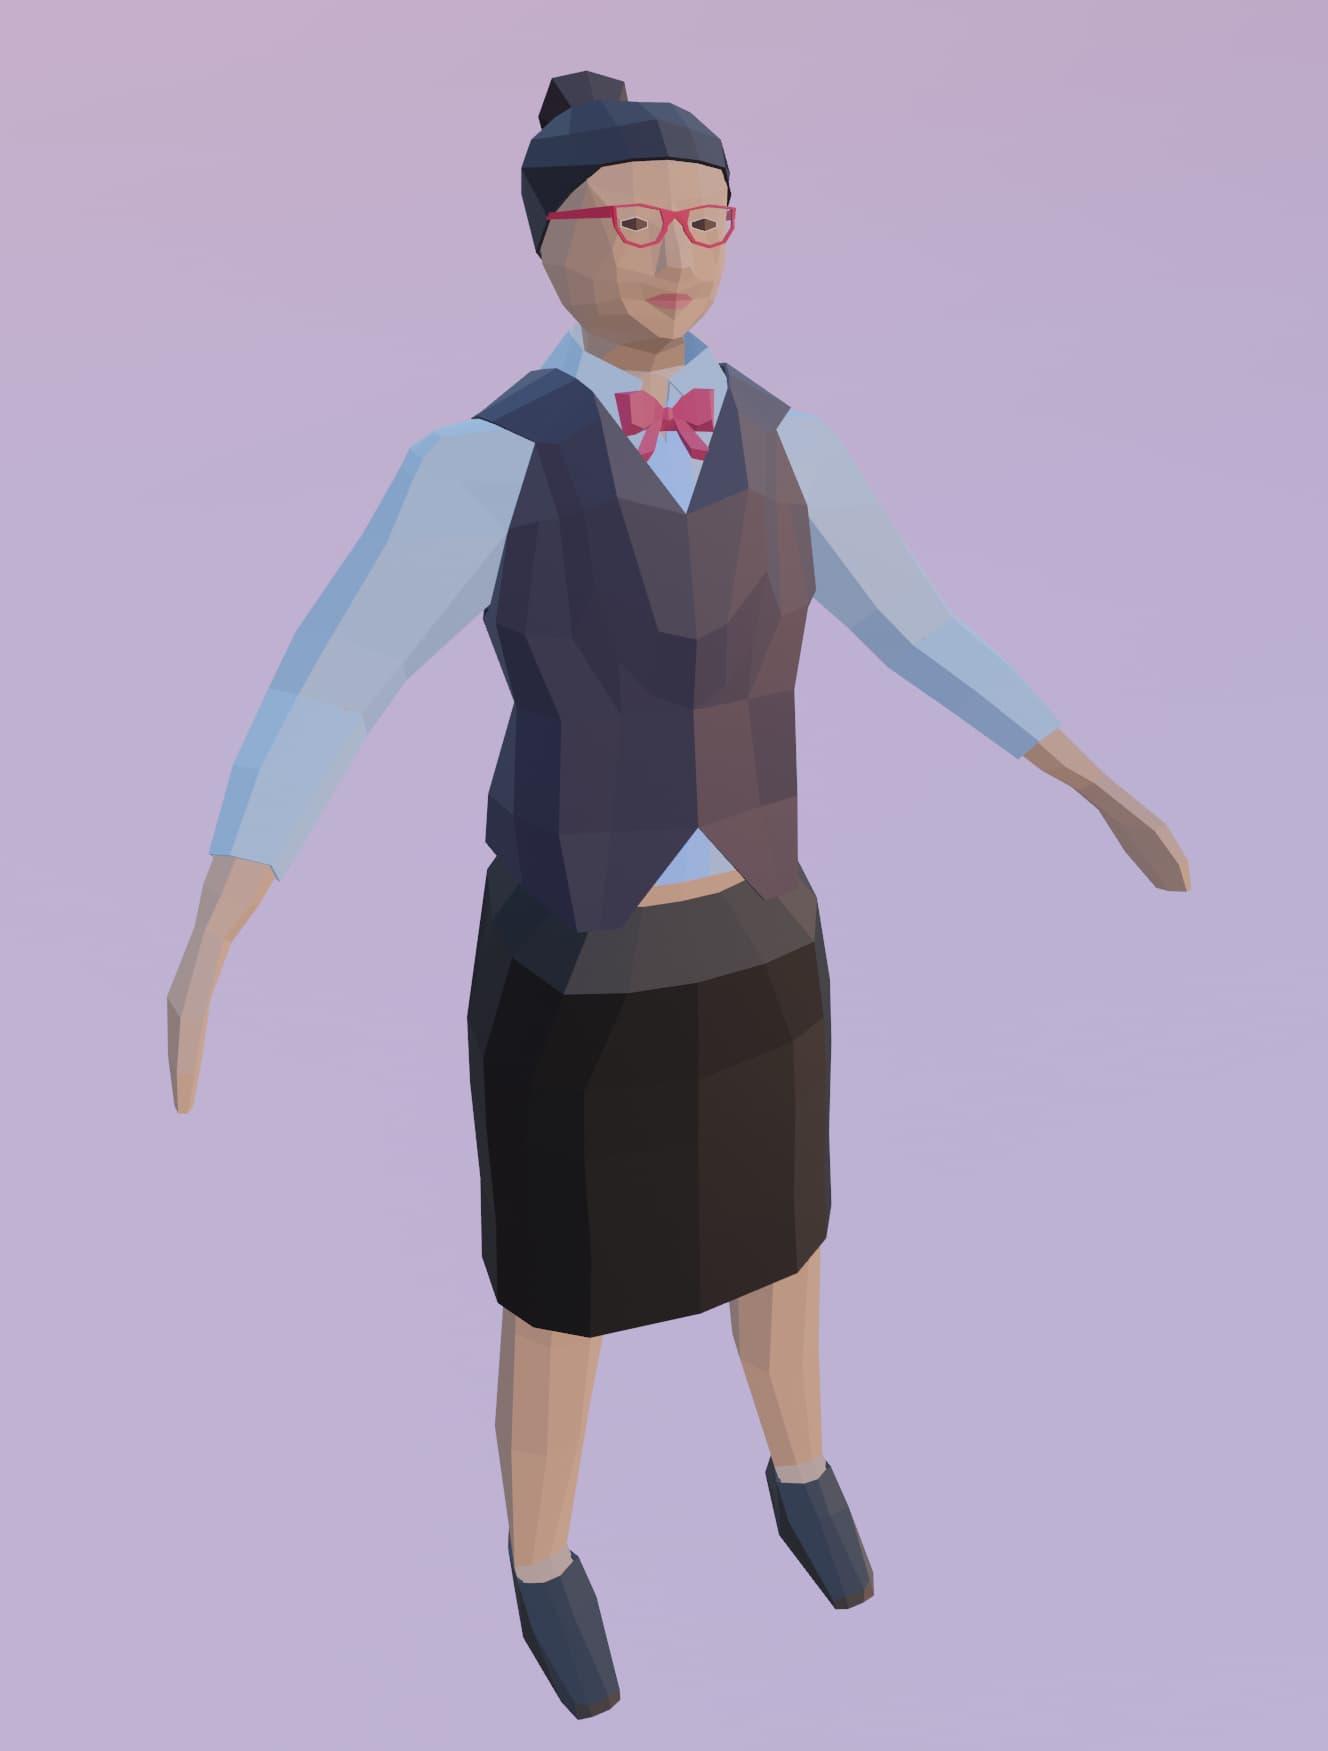 A low-poly 3D model of an Asian woman with black hair, wearing red glasses, a pink bowtie, a formal waistcoat over a blue collared shirt, a black skirt, and dress shoes